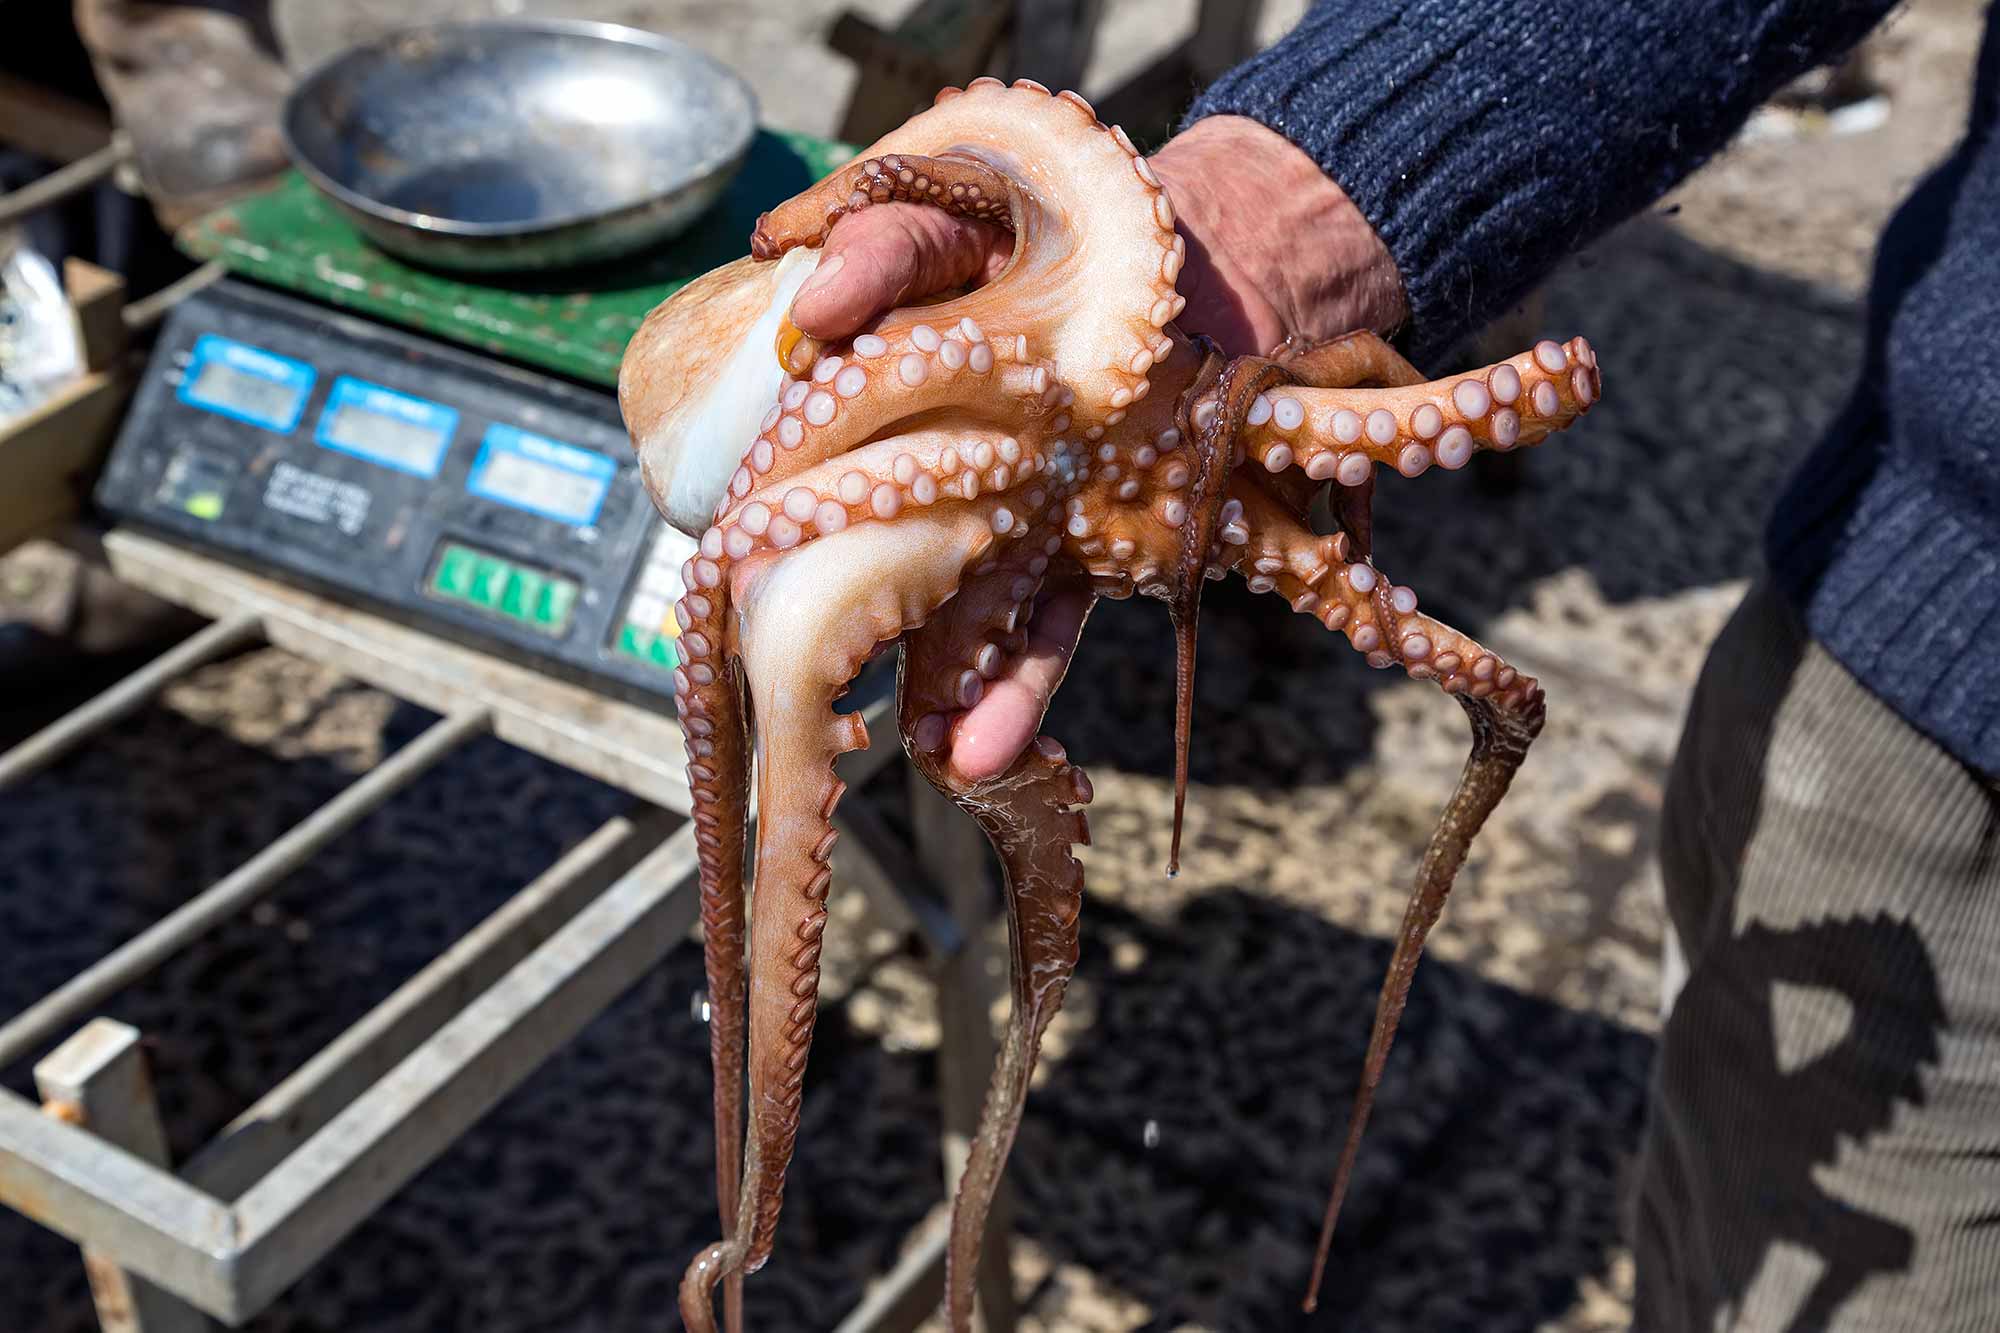 Hands of a man holding an octopus in Trapani, Sicily. © Ulli Maier & Nisa Maier